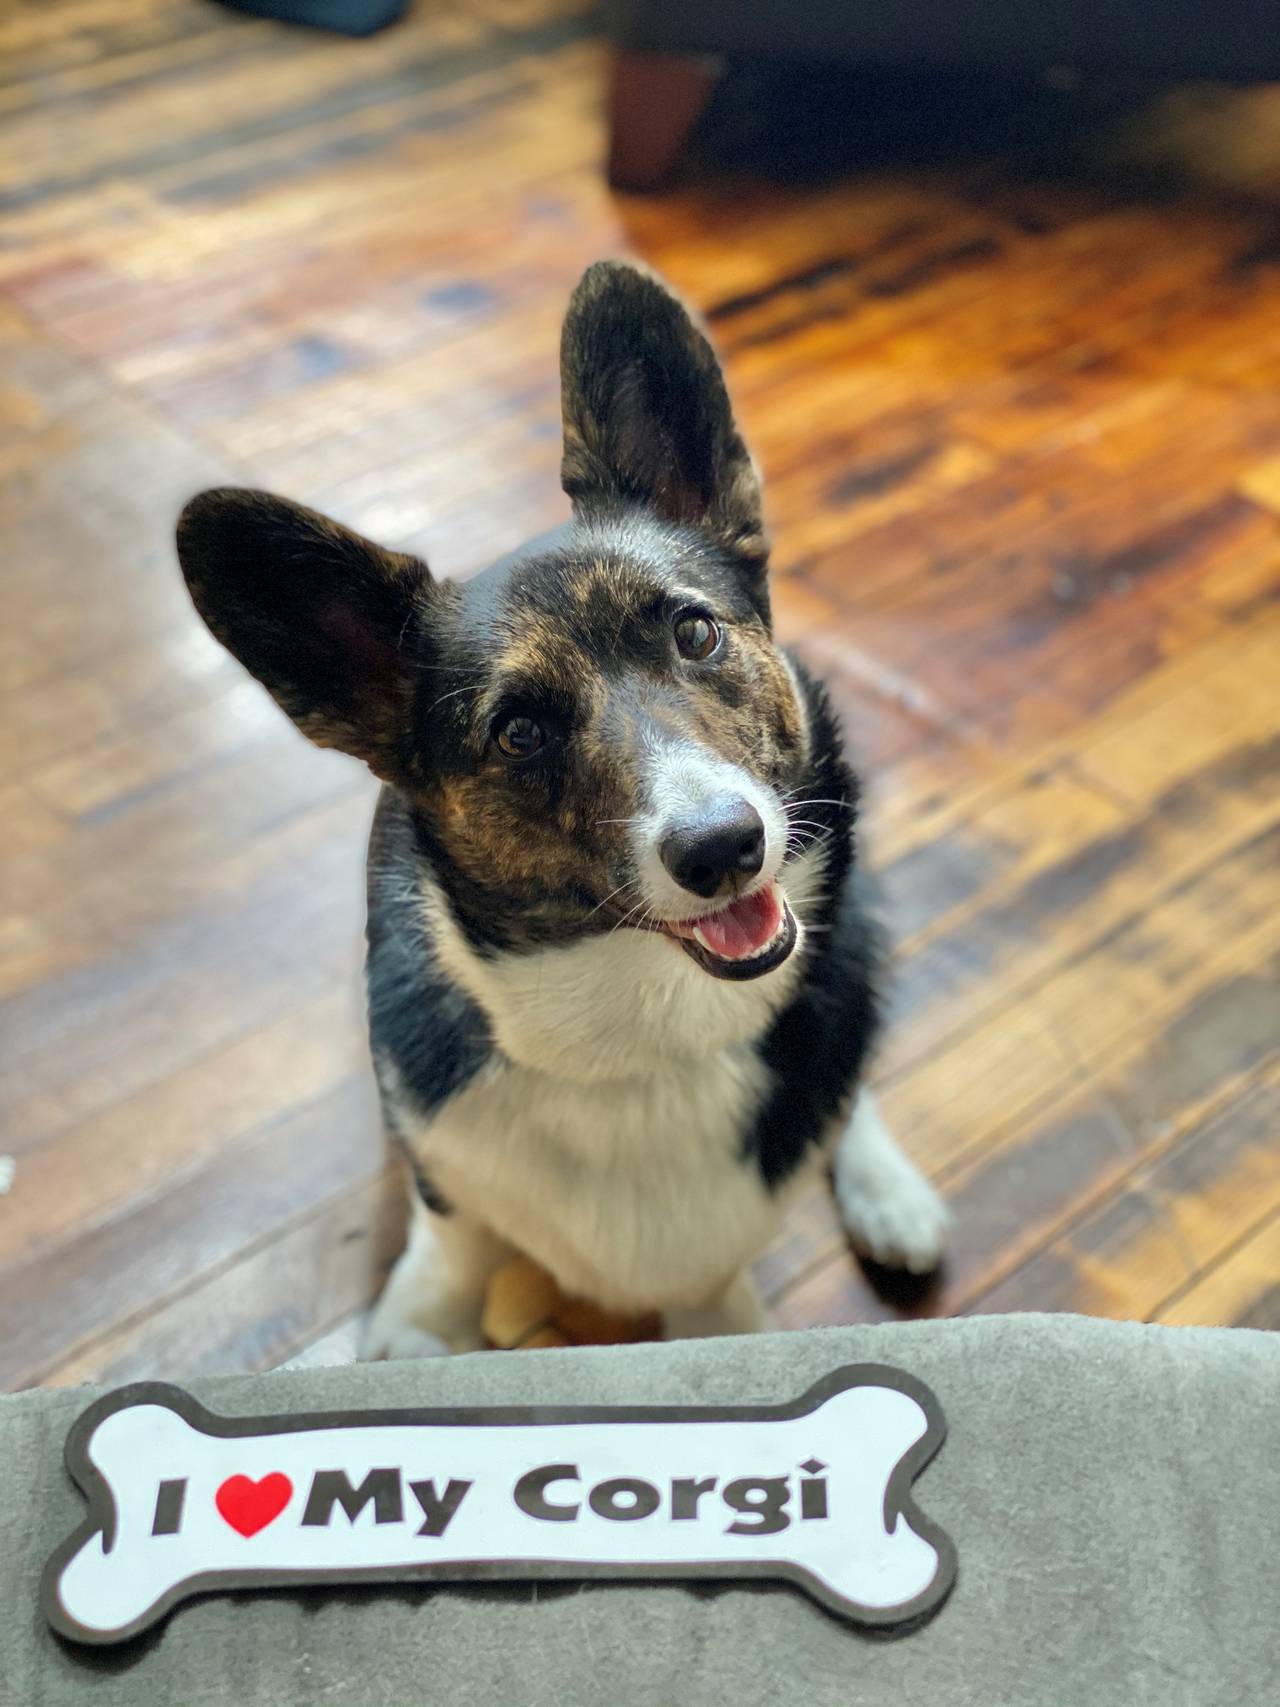 As if Chichi the corgi needs anymore praise and attention, her pet parents continue to buy corgi merchandise whenever they can.